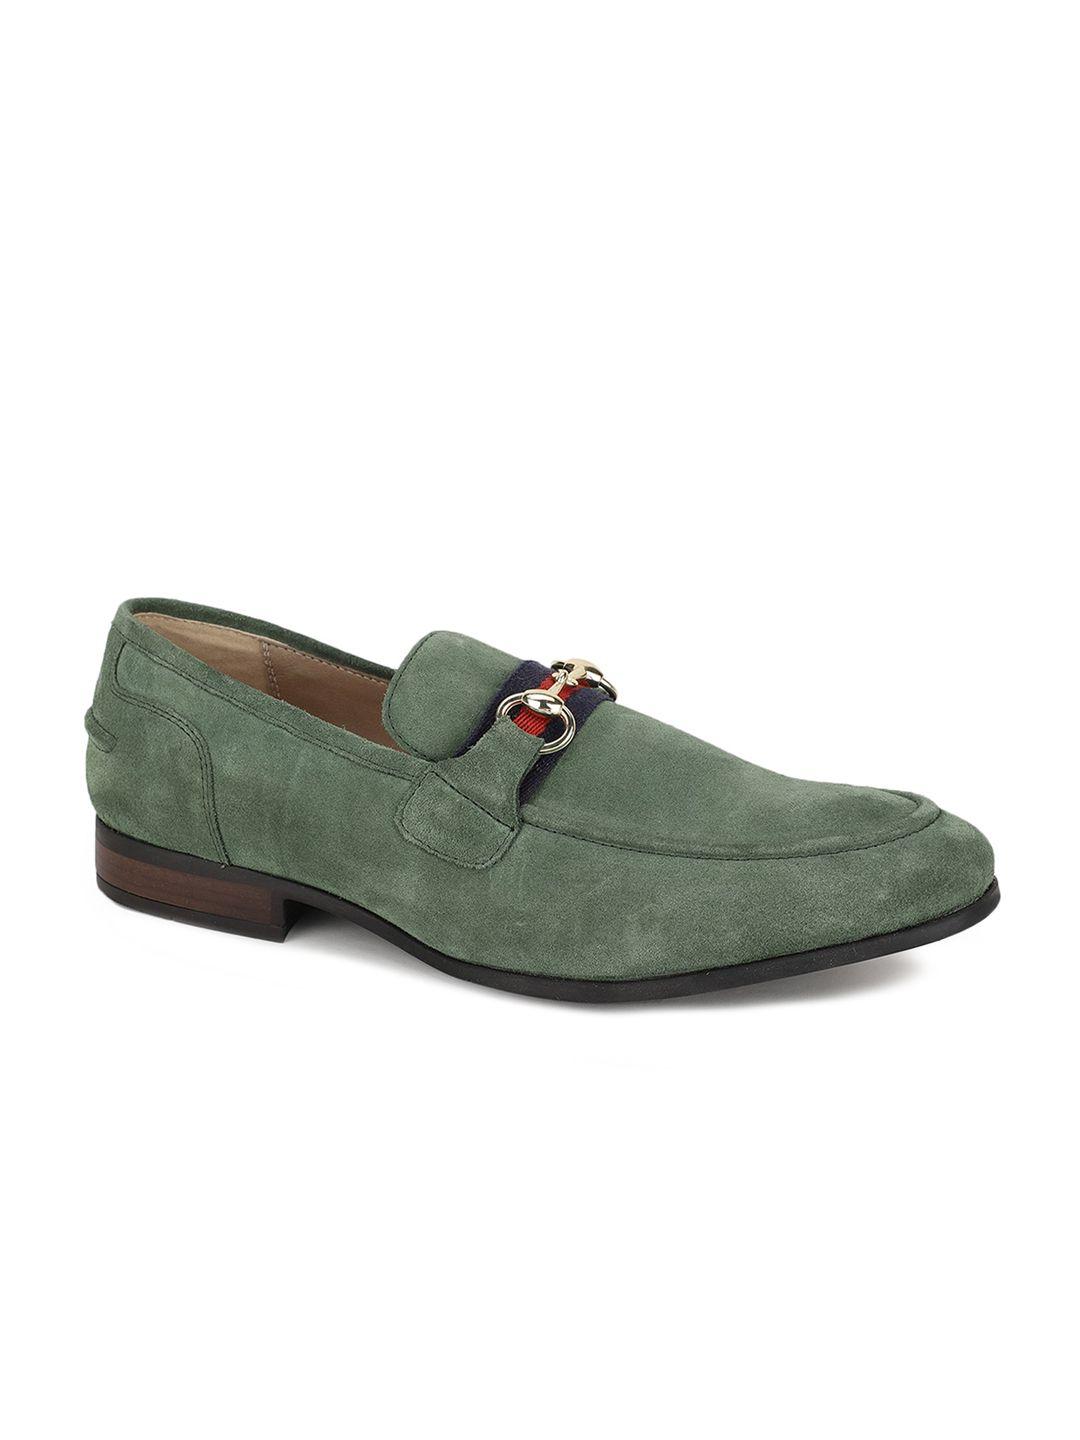 hush puppies men green suede loafers